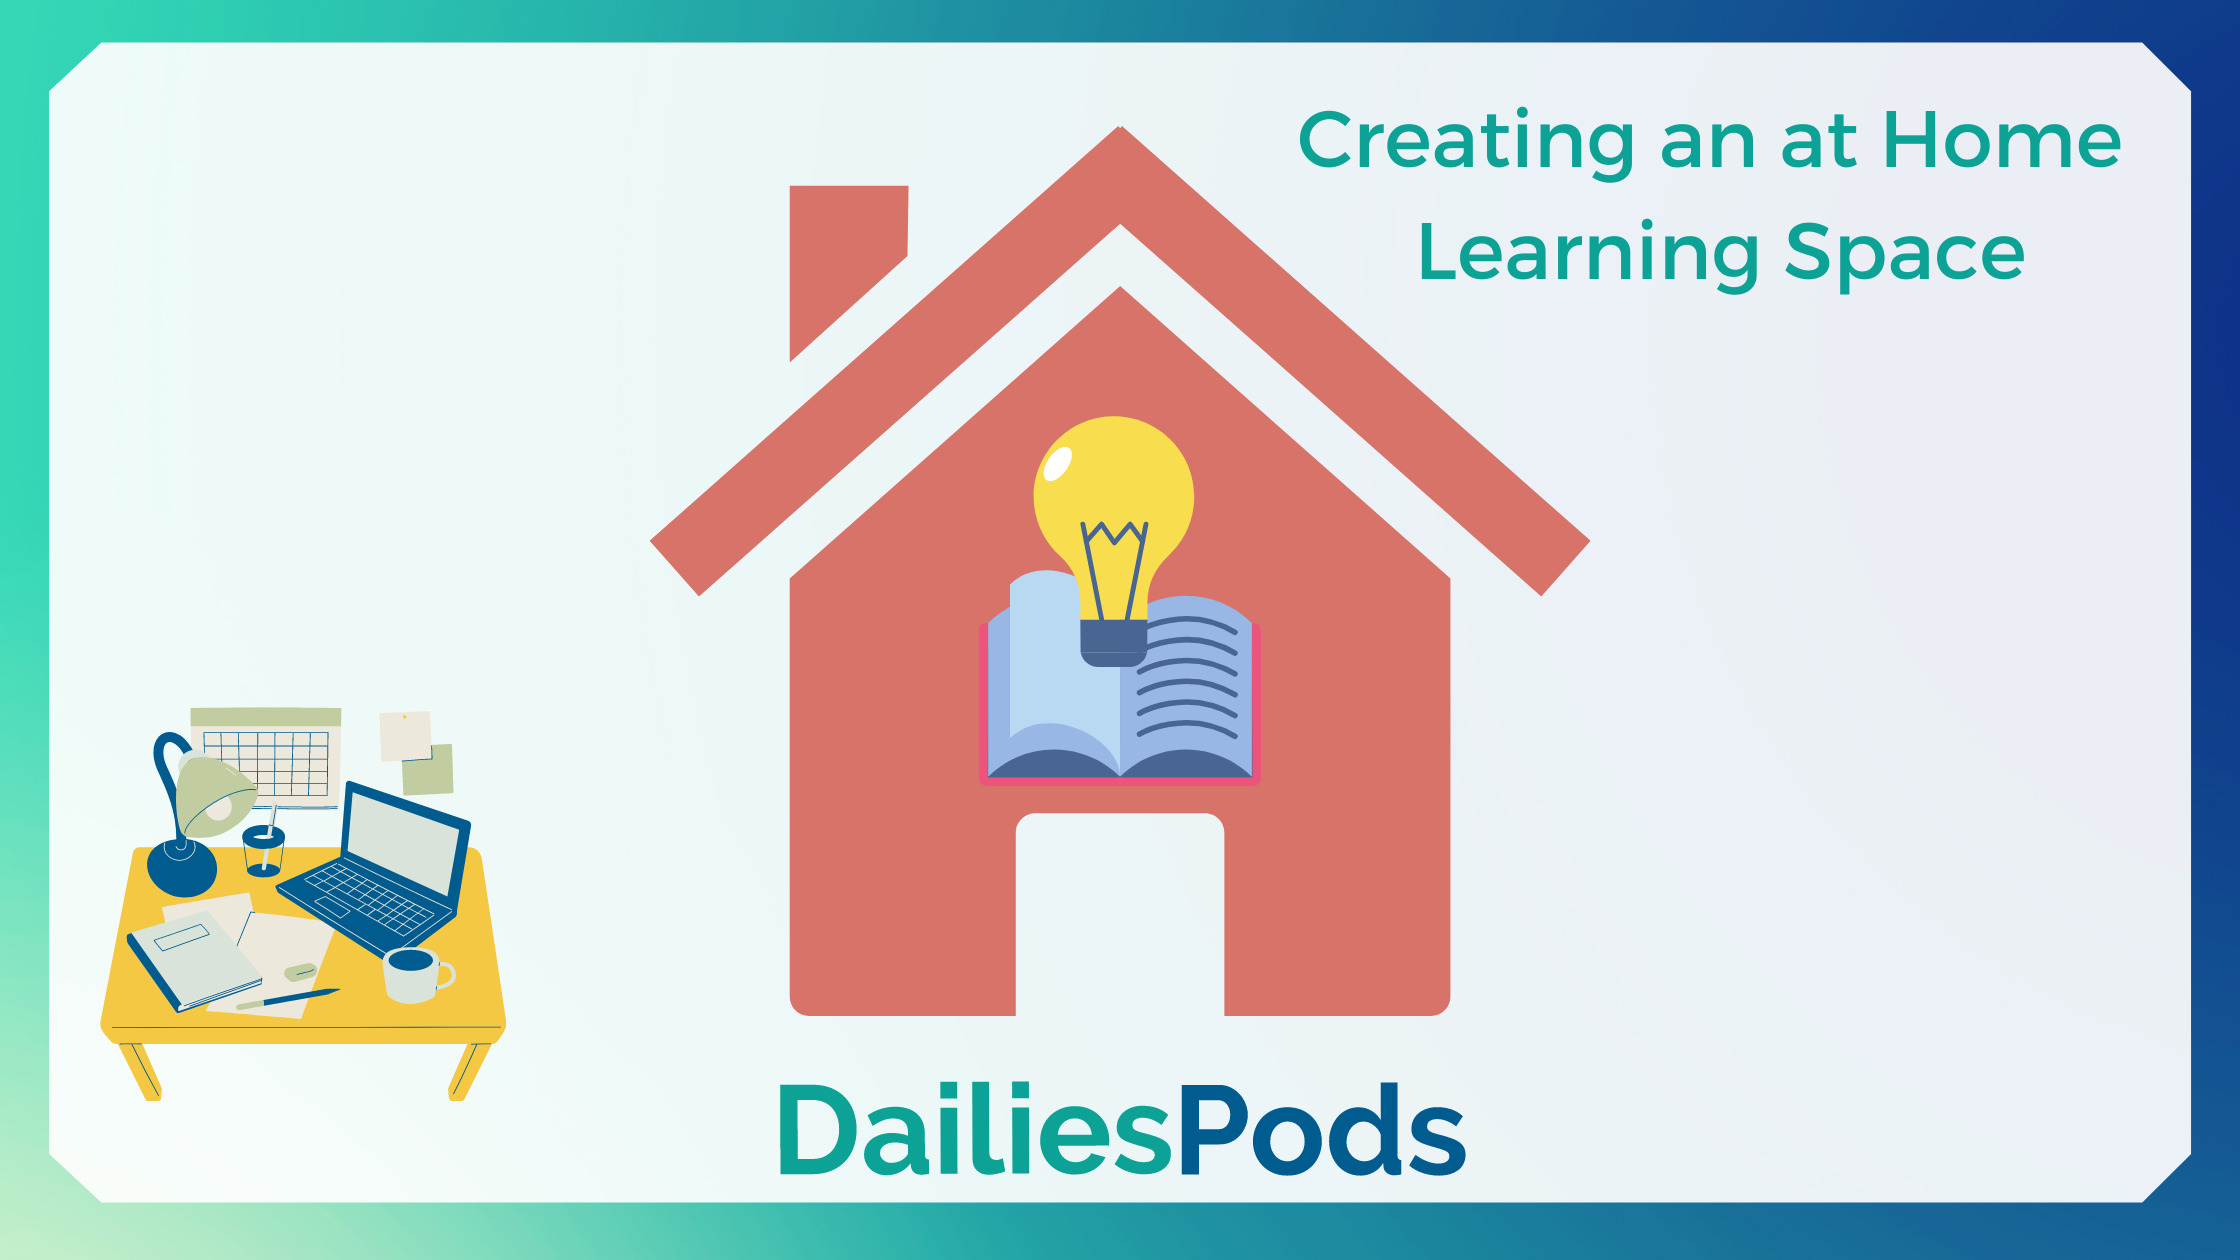 Creating an at Home Learning Space